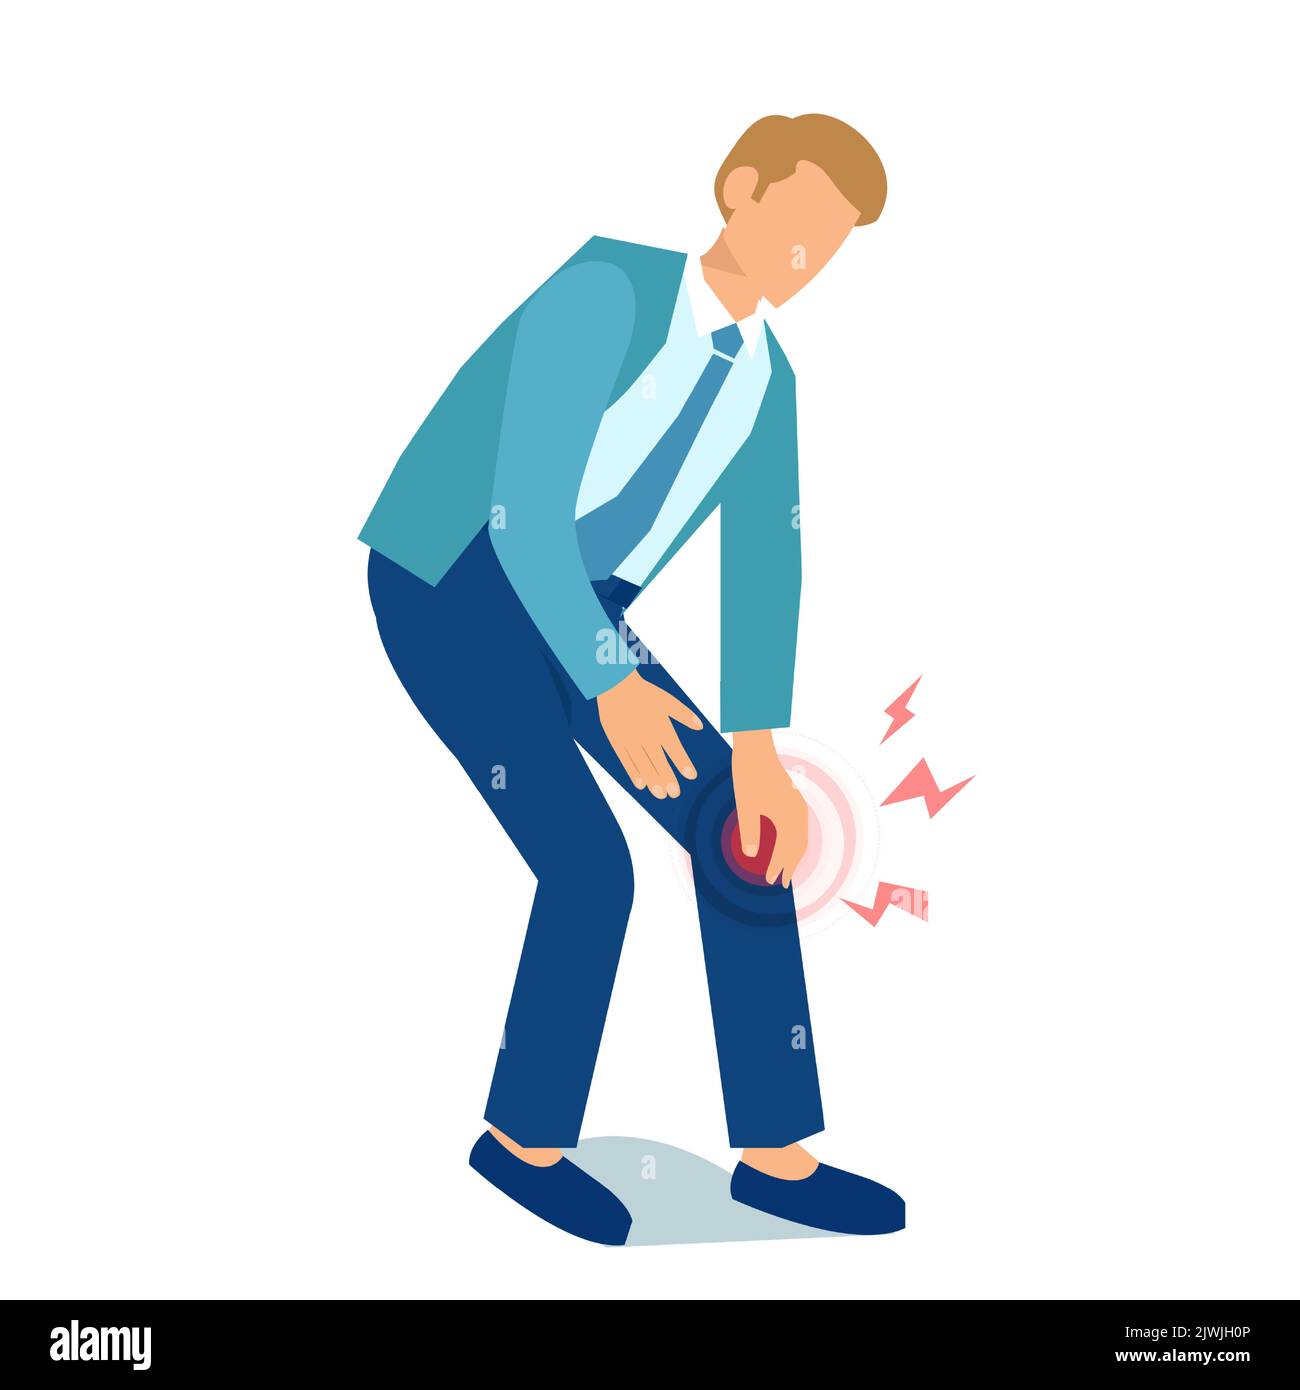 Vector of a young man with a knee pain Stock Vector